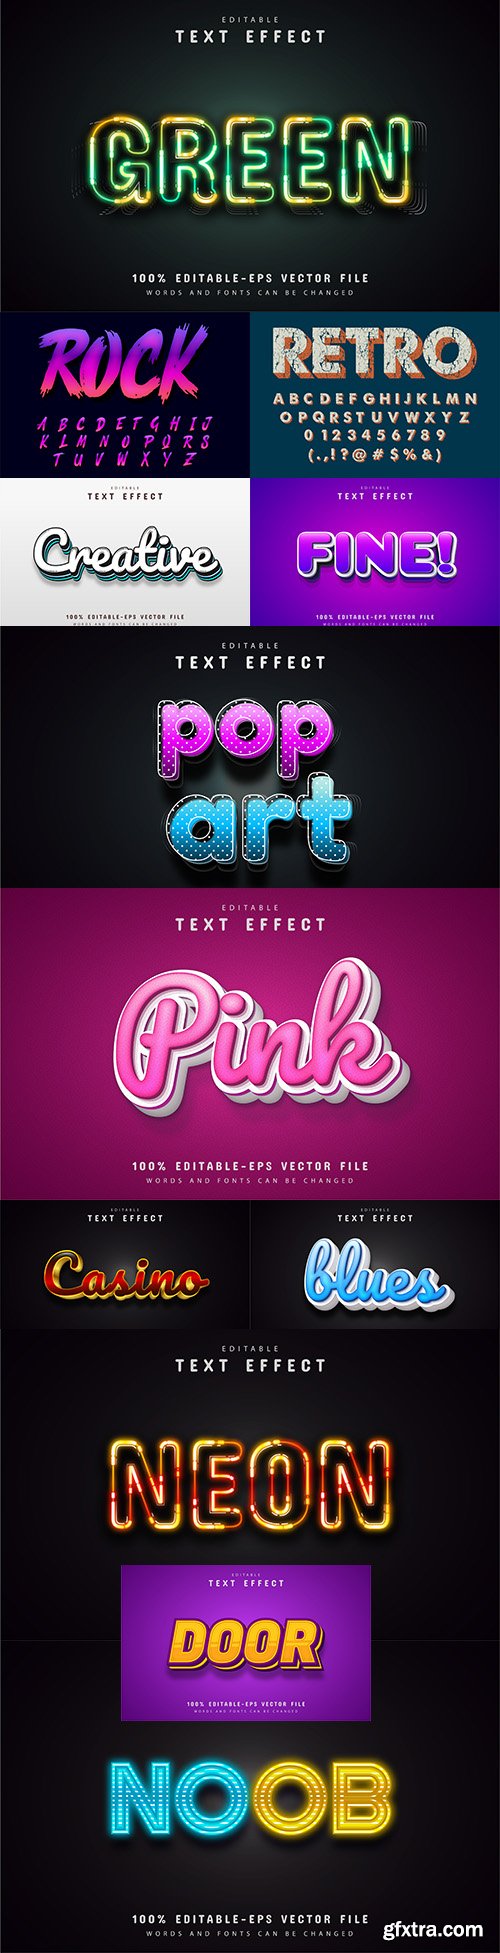 Editable font and 3d effect text design collection illustration 66